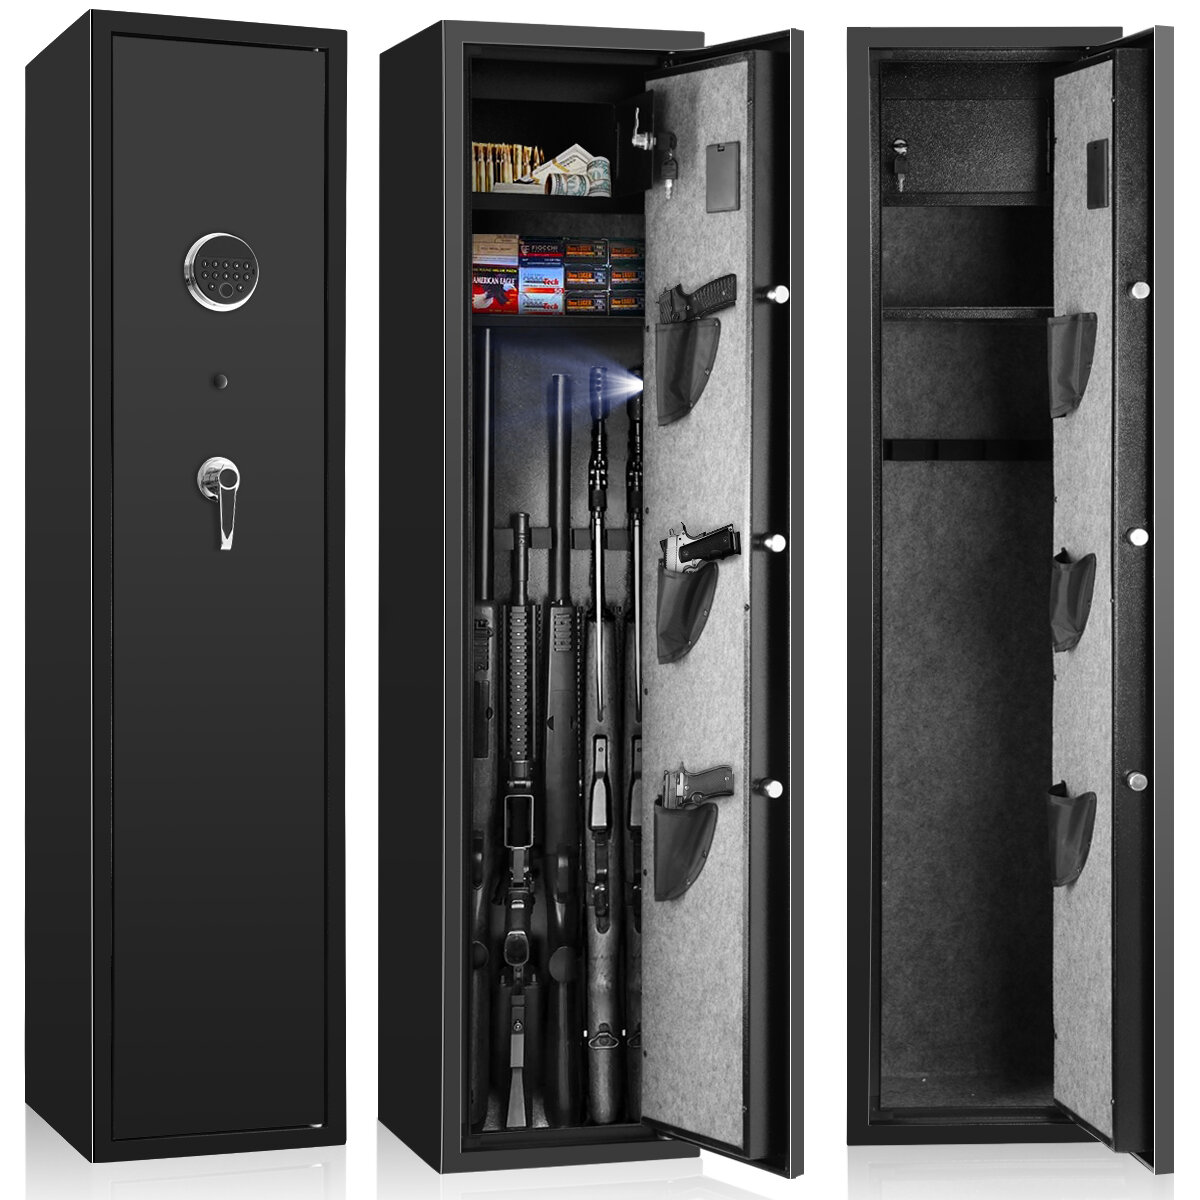 Image of Safe Quick Access 5 Long Gun Safe Cabinet for Pistol and Home With Removable Storage Shelf for Jewelry/Valuables